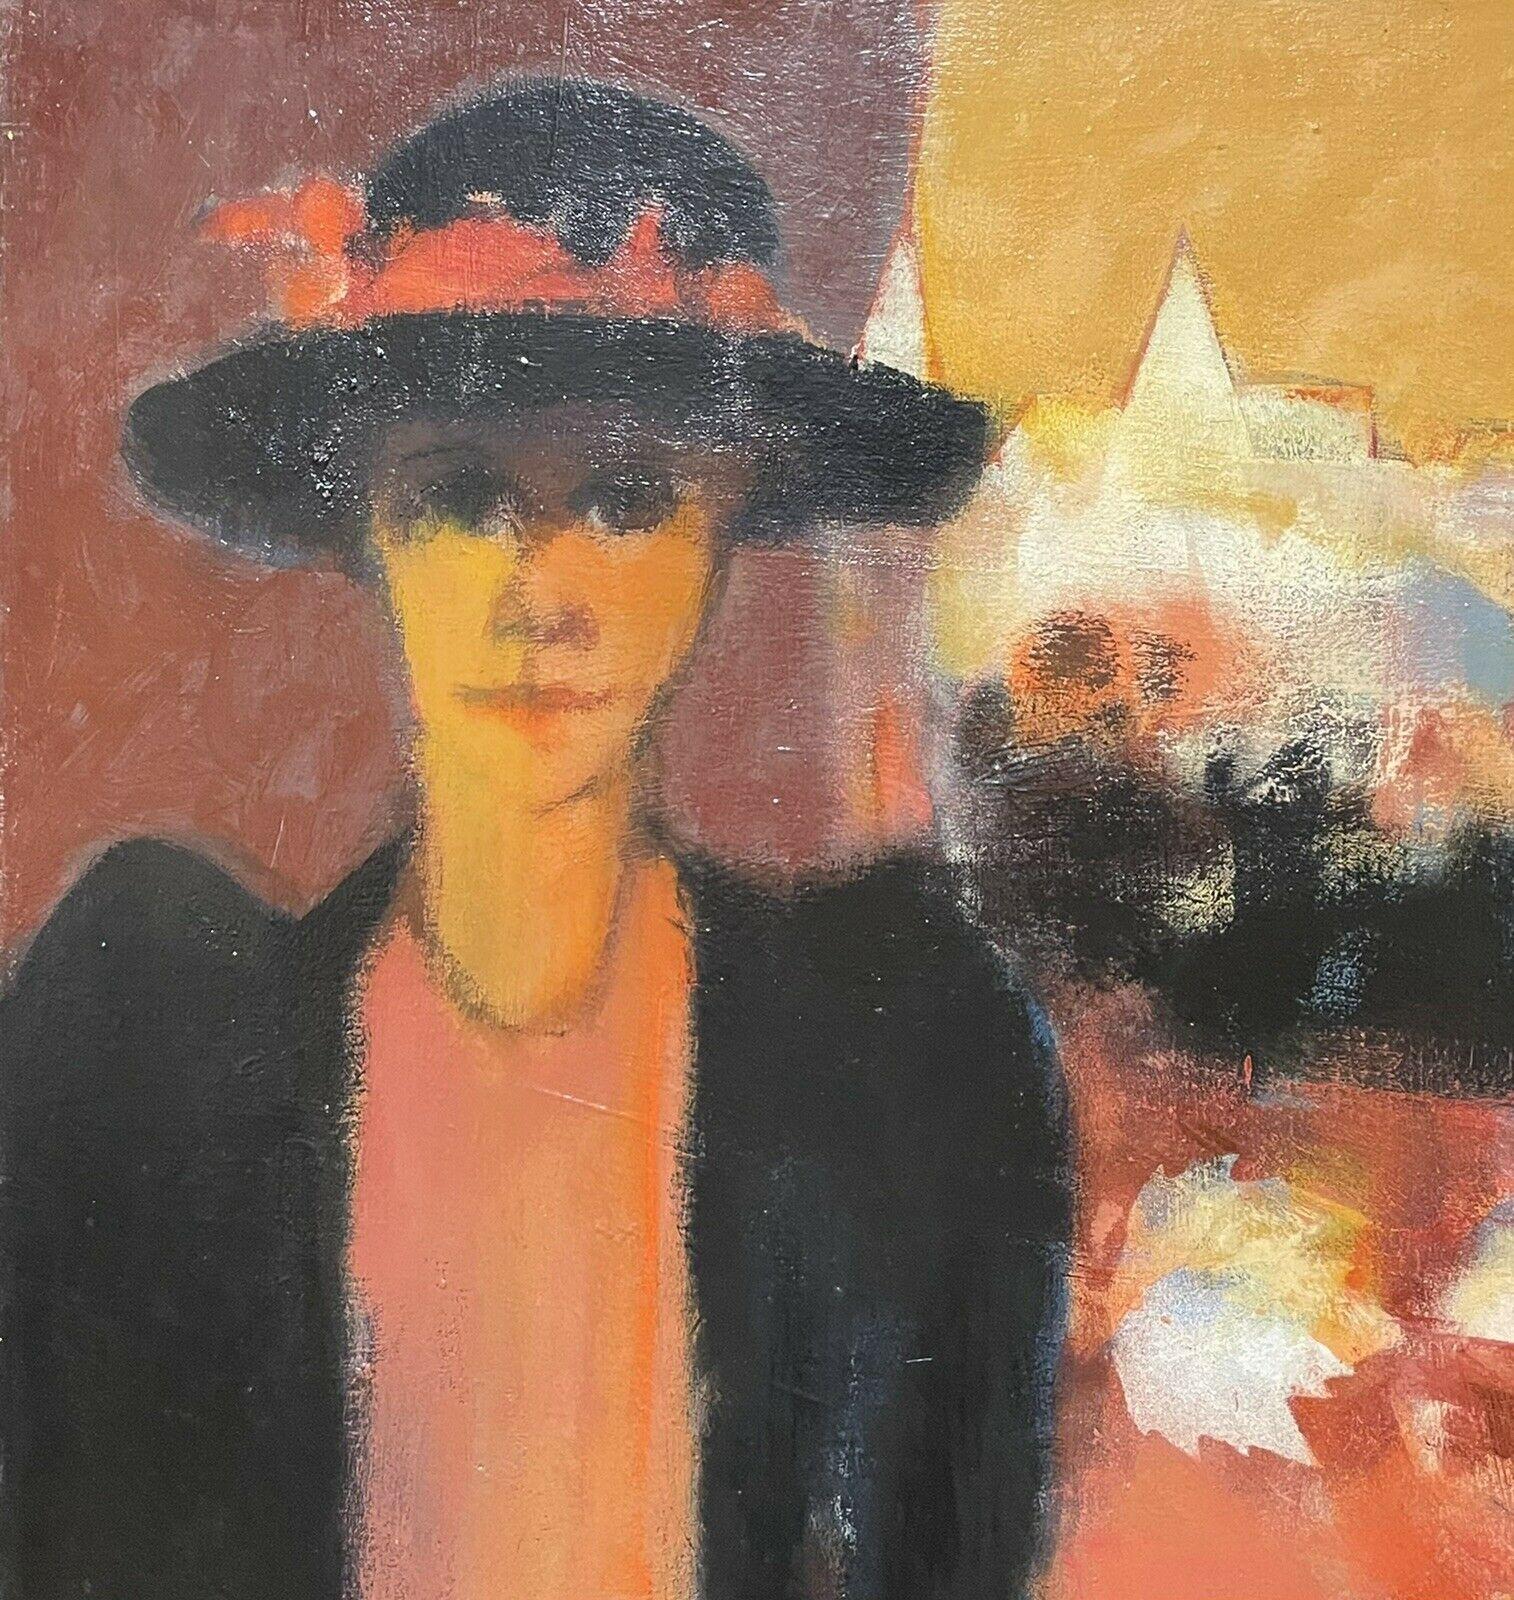 LEROY - LARGE FRENCH CONTEMPORARY ABSTRACT CUBIST PAINTING - LADY IN HAT - Frame - Painting by R.Leroy